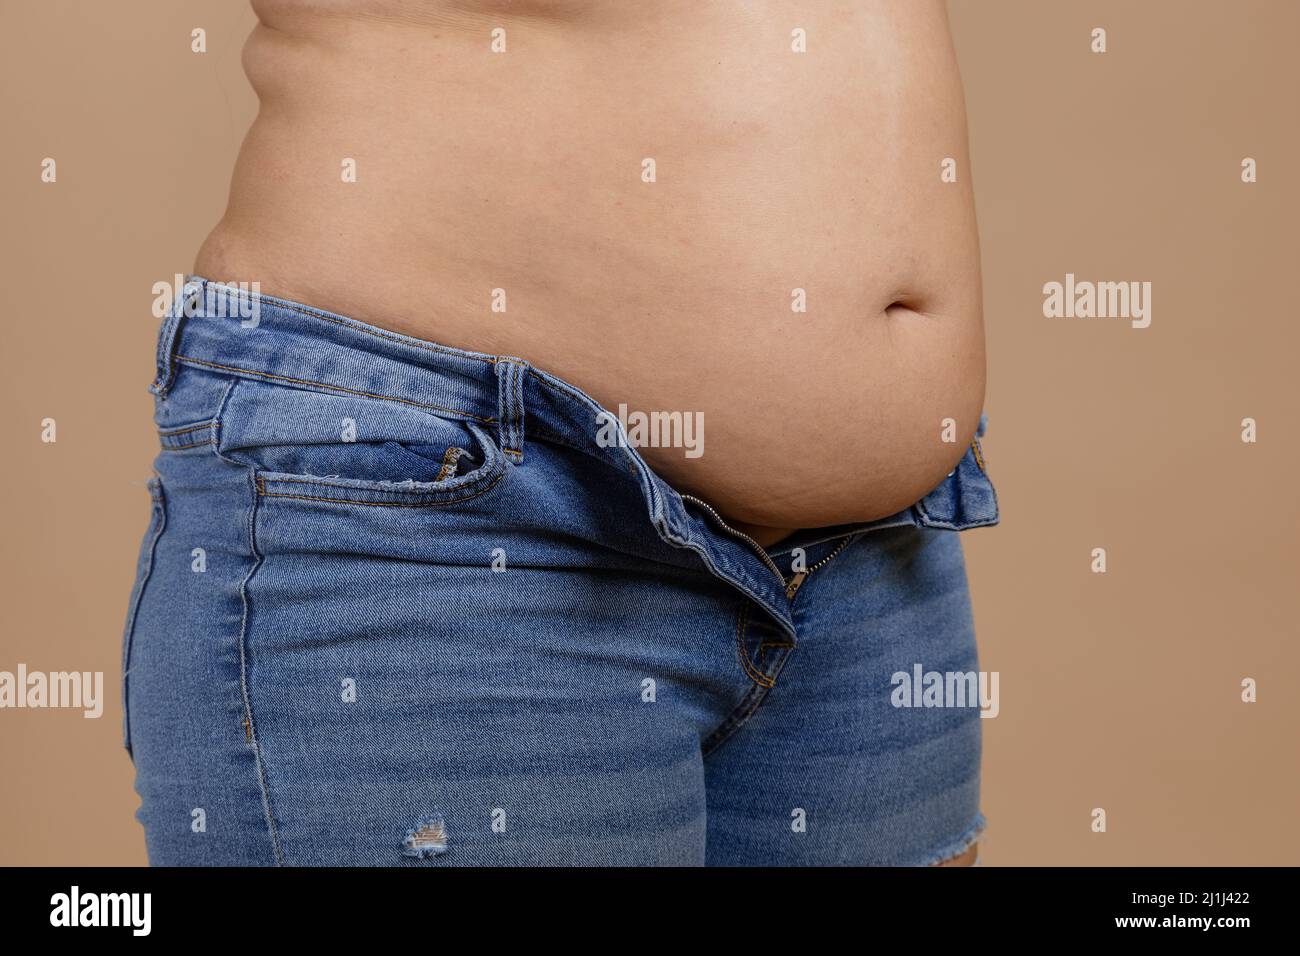 Overweighted plumpy lady with flabby stomach and fat sides showing waist in unzipped jeans. Sudden weight gain. Visceral fat. Body positive. Tight Stock Photo